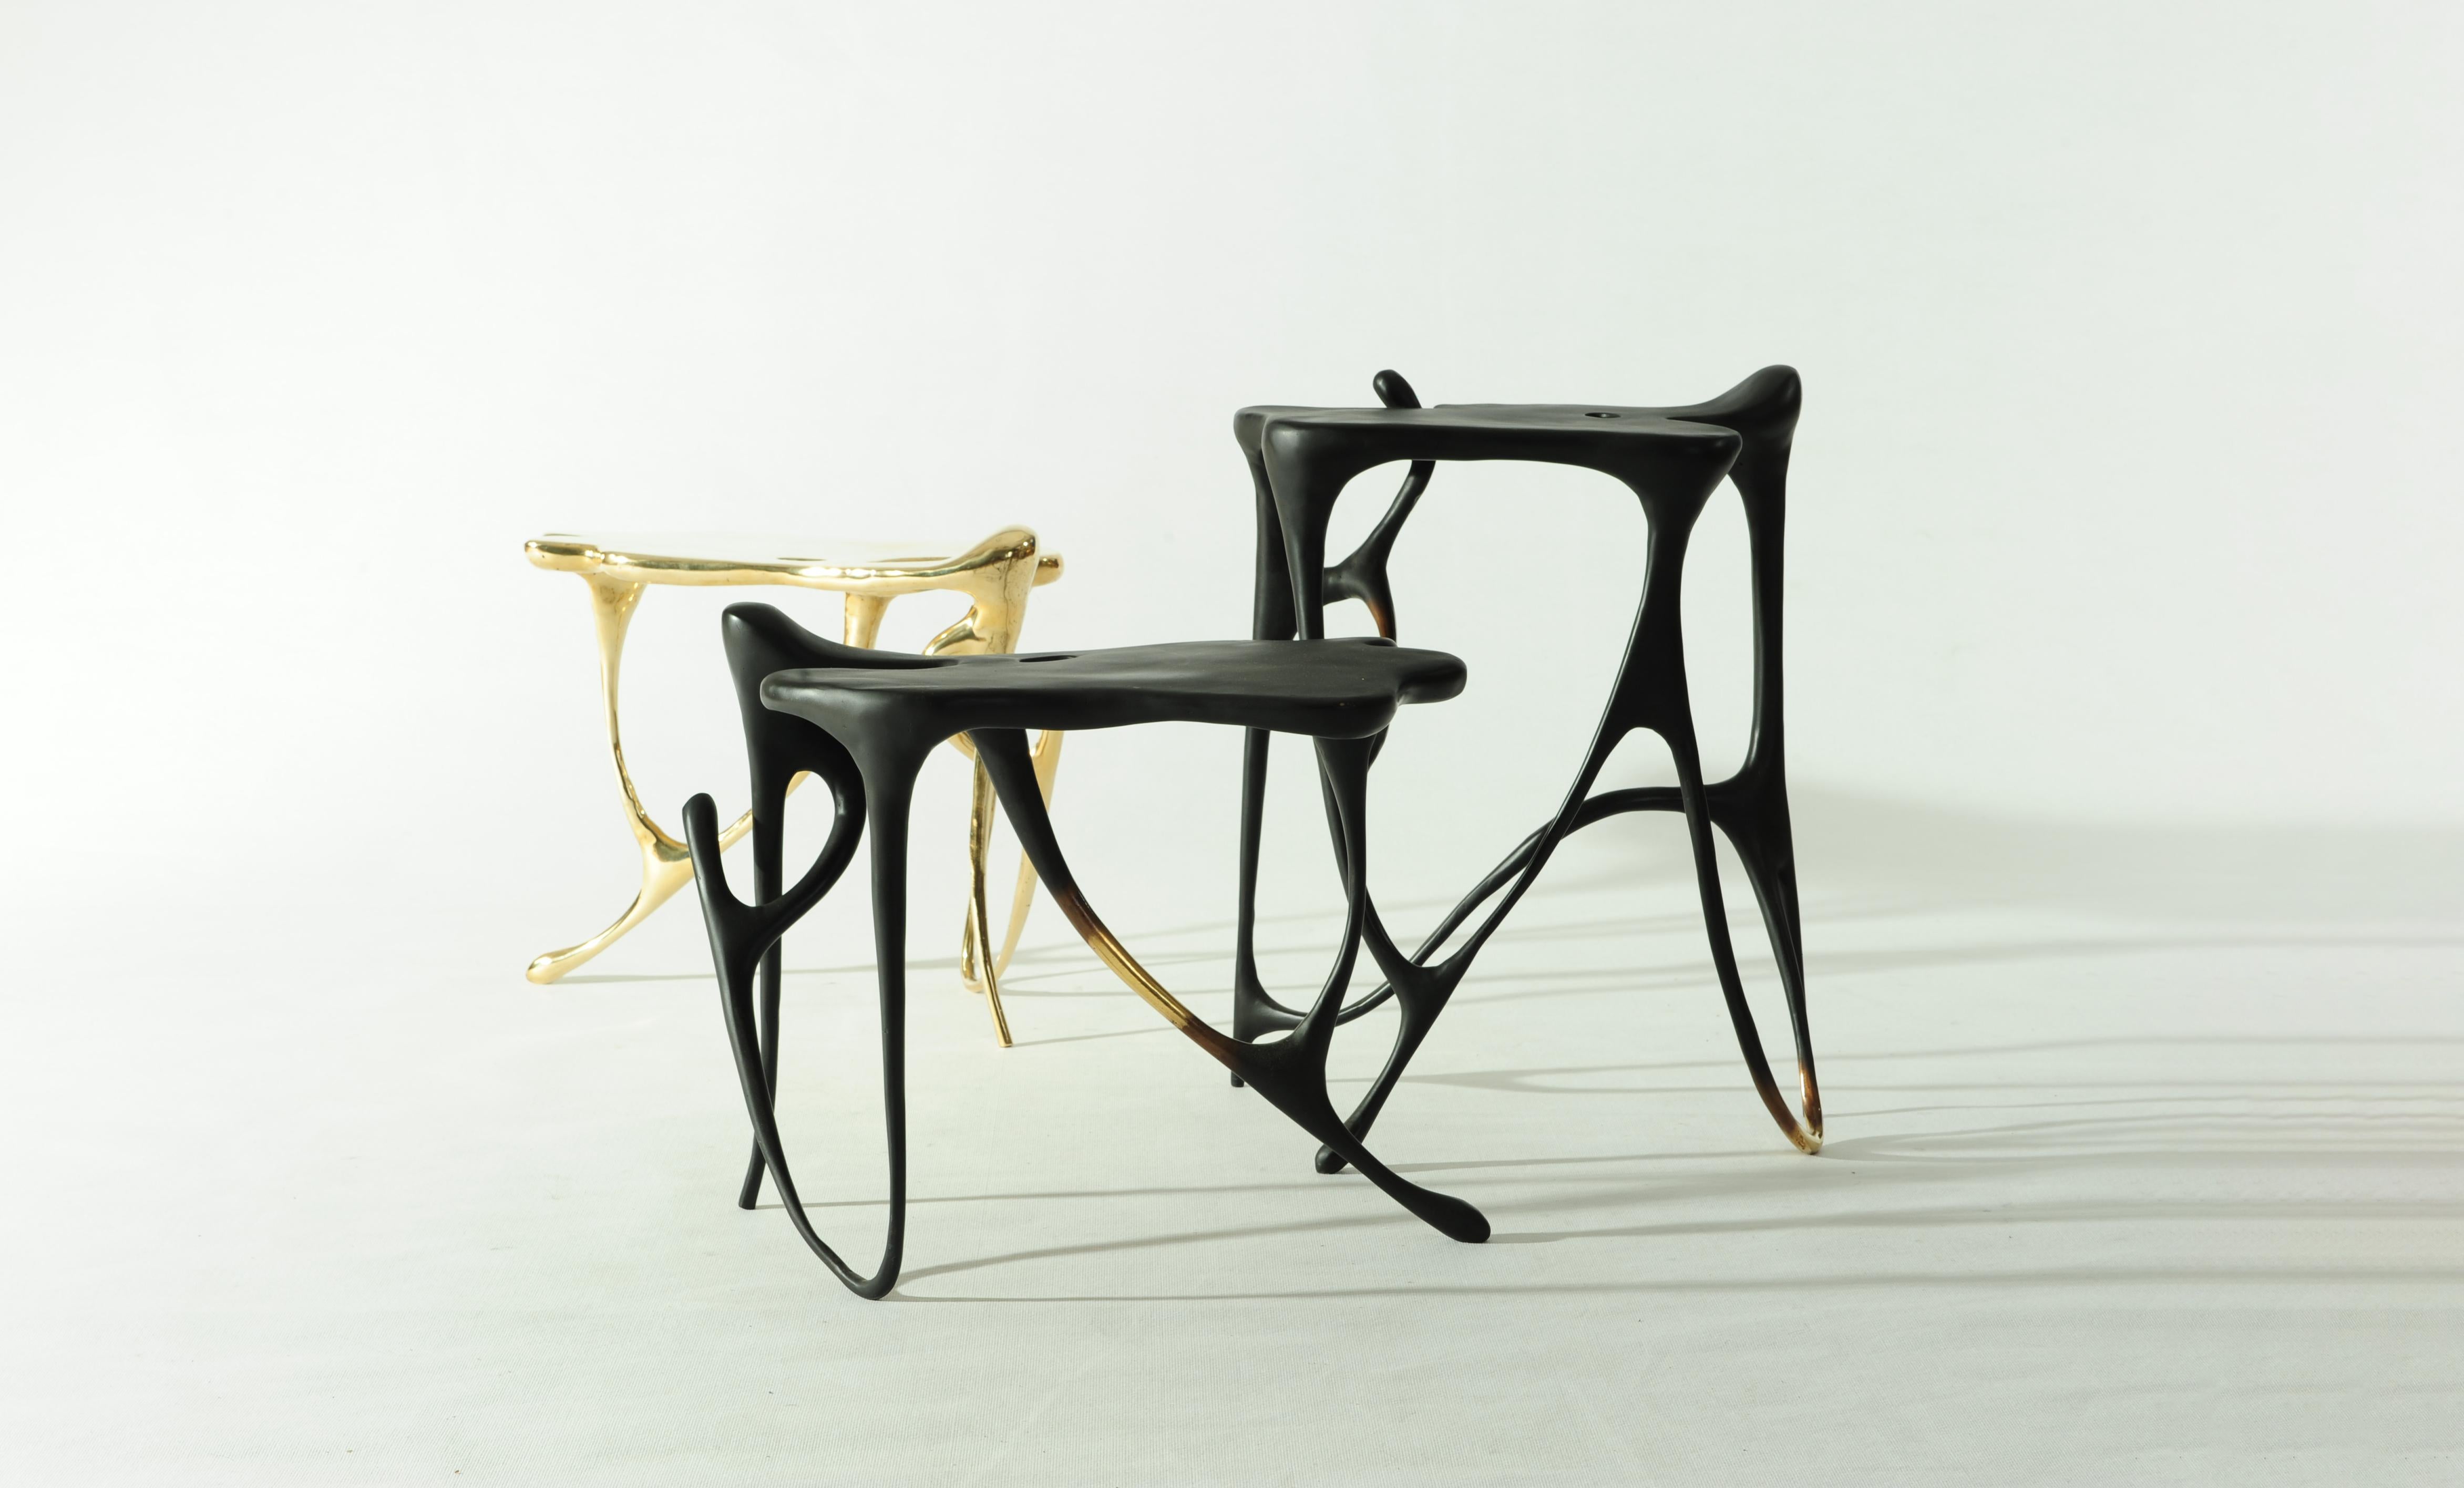 Calligraphic Sculpted Brass Side Table by Misaya 2